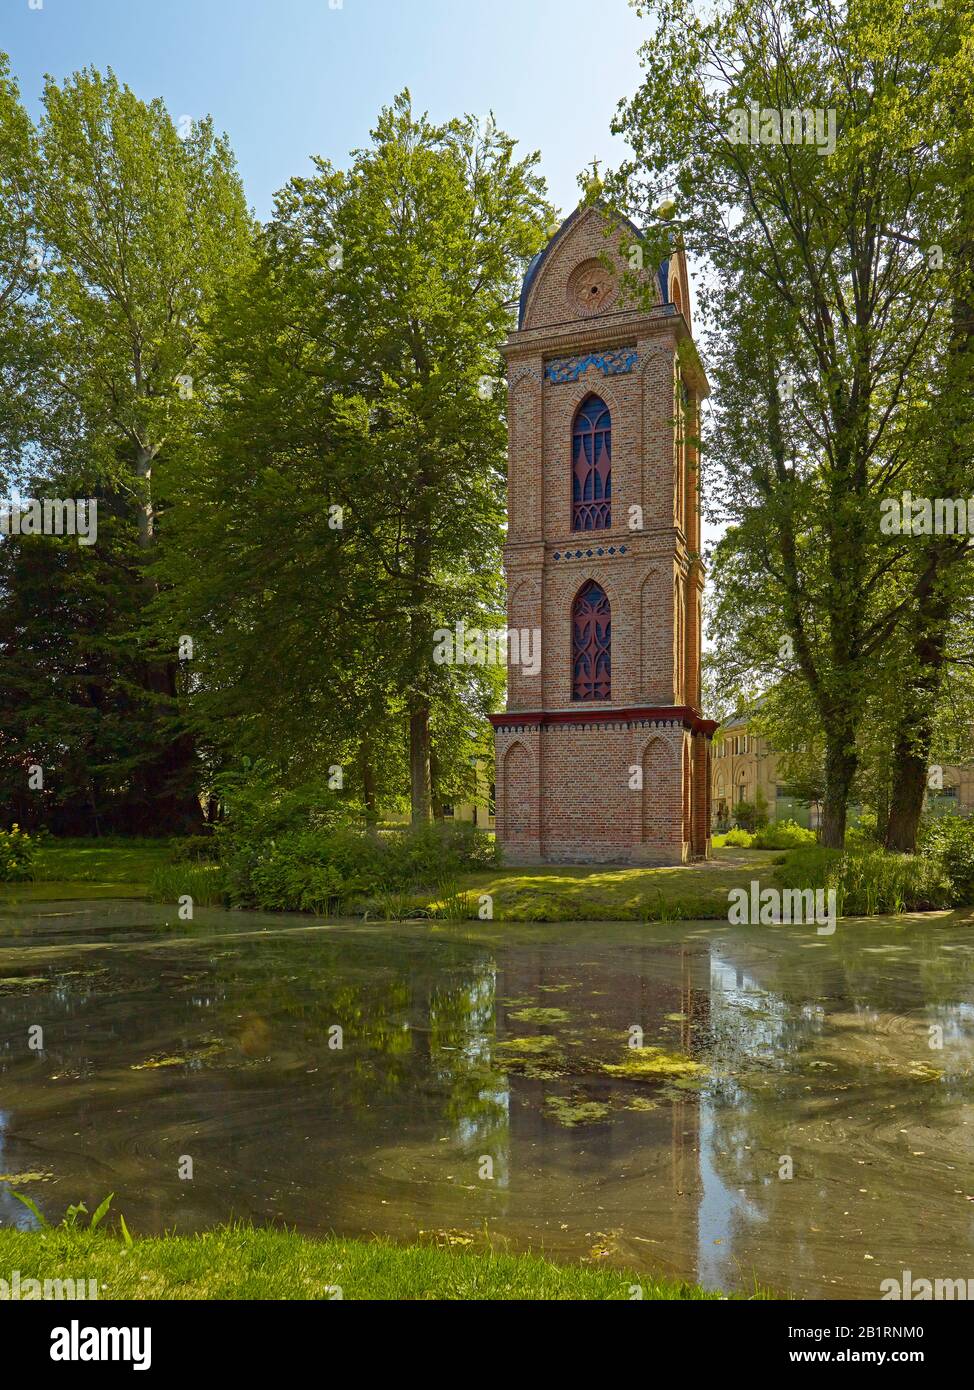 Bell tower of the Catholic Church in the Ludwigslust Palace Park, Ludwigslust-Parchim district, Mecklenburg-West Pomerania, Germany, Stock Photo